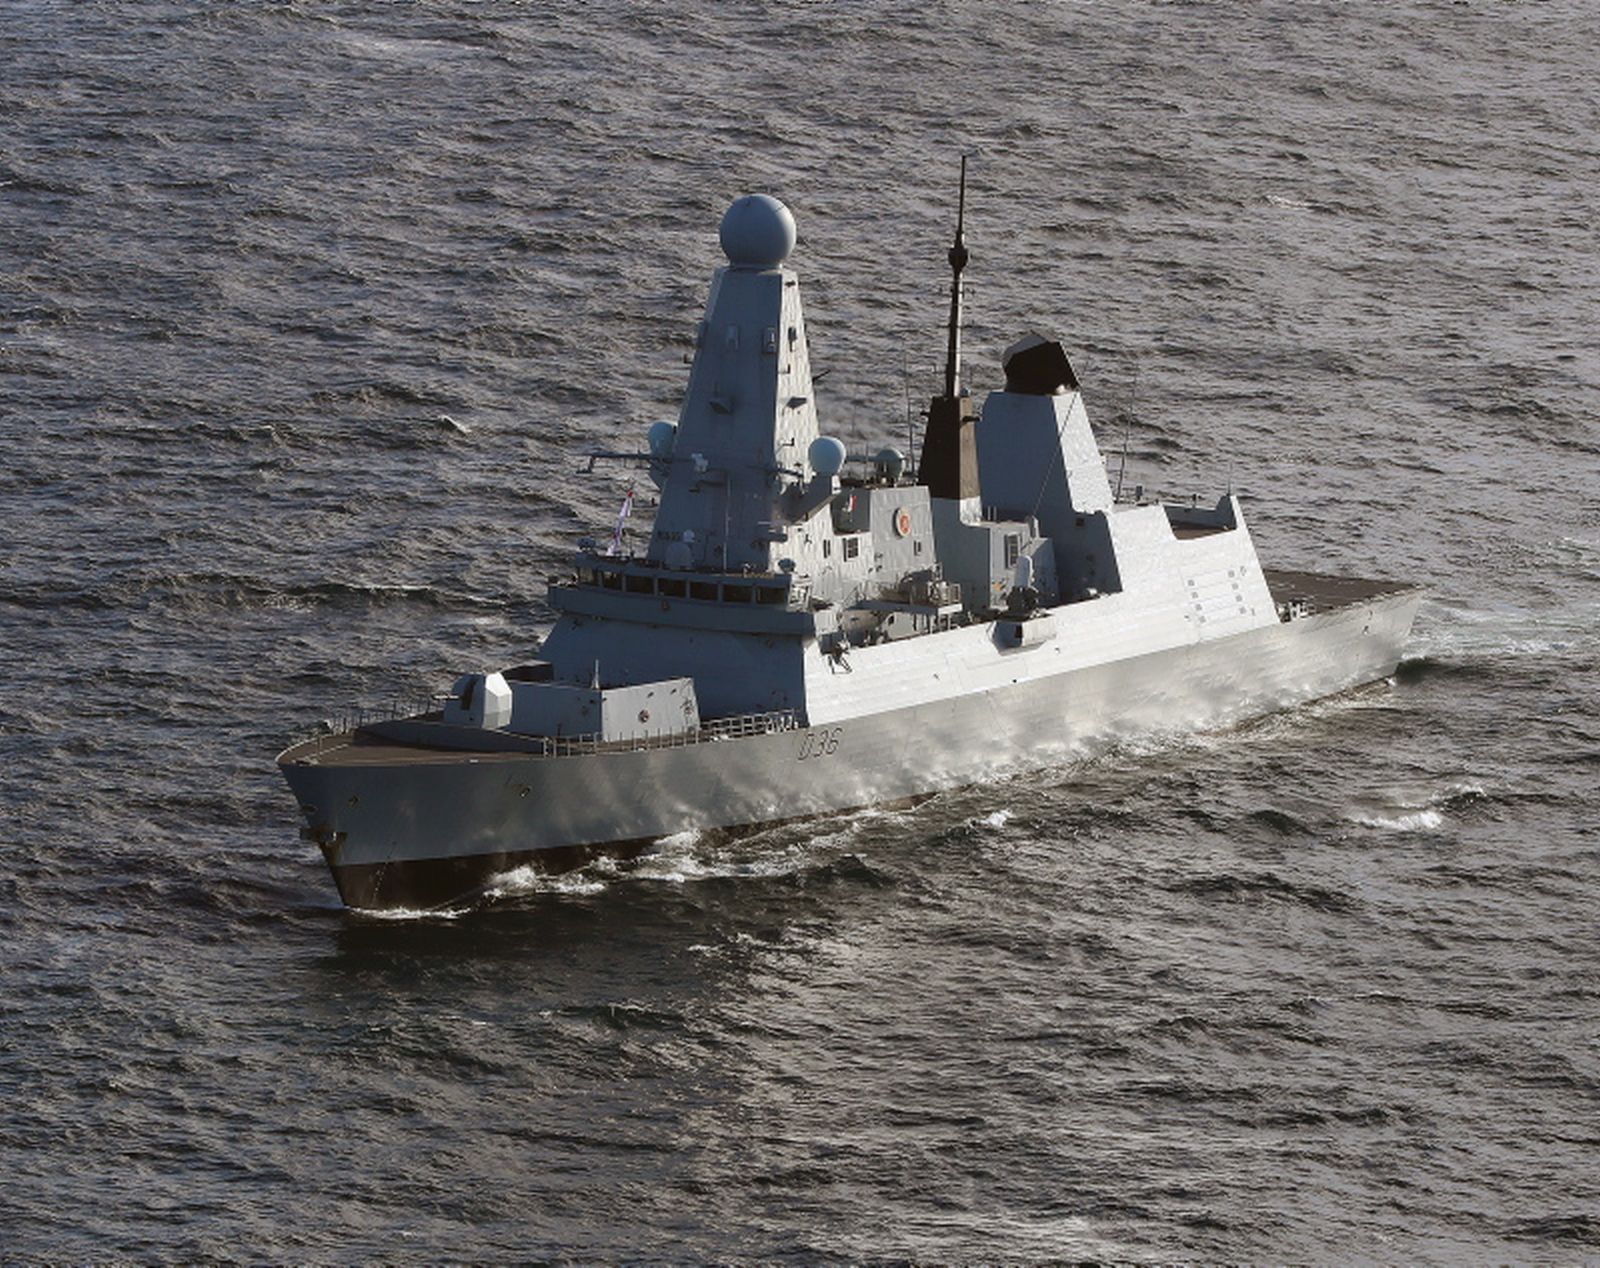 epa09295231 (FILE) - A handout photo made available by the British Royal Navy showing the Royal Navy warship HMS Defender off the coast of Scotland, 19 May 2019 (reissued 23 June 2021). The Russian Ministry of Defence on 23 June 2021 announced it Russian bombers had dropped four bombs in front of the British destroyer as warning shots when it crossed into Russian waters in the Black Sea.  EPA/LPhot Ben Shread / BRITISH ROYAL MANDATORY CREDIT: MOD/CROWN COPYRIGHT HANDOUT EDITORIAL USE ONLY/NO SALES *** Local Caption *** 55209372